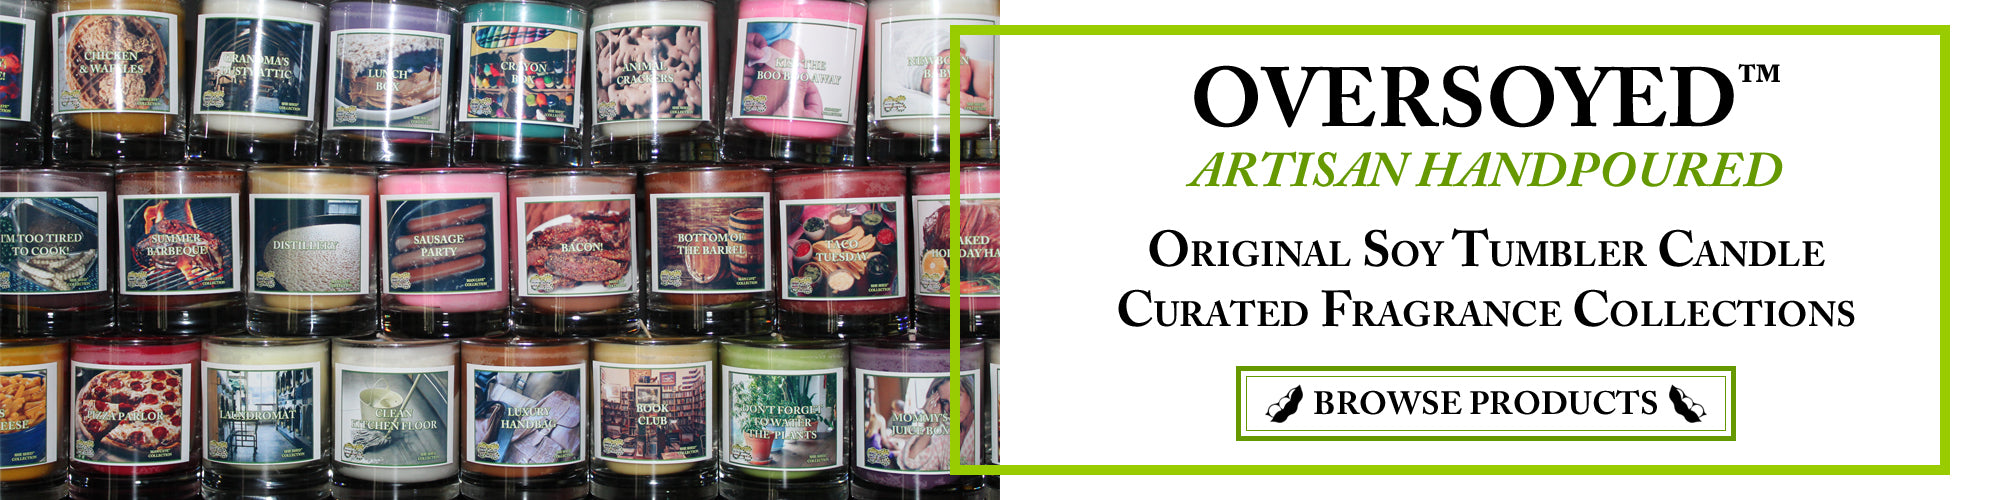 OverSoyed™ Artisan Handcrafted Hand Poured Soy Candle Original Curated Fragrance Collections